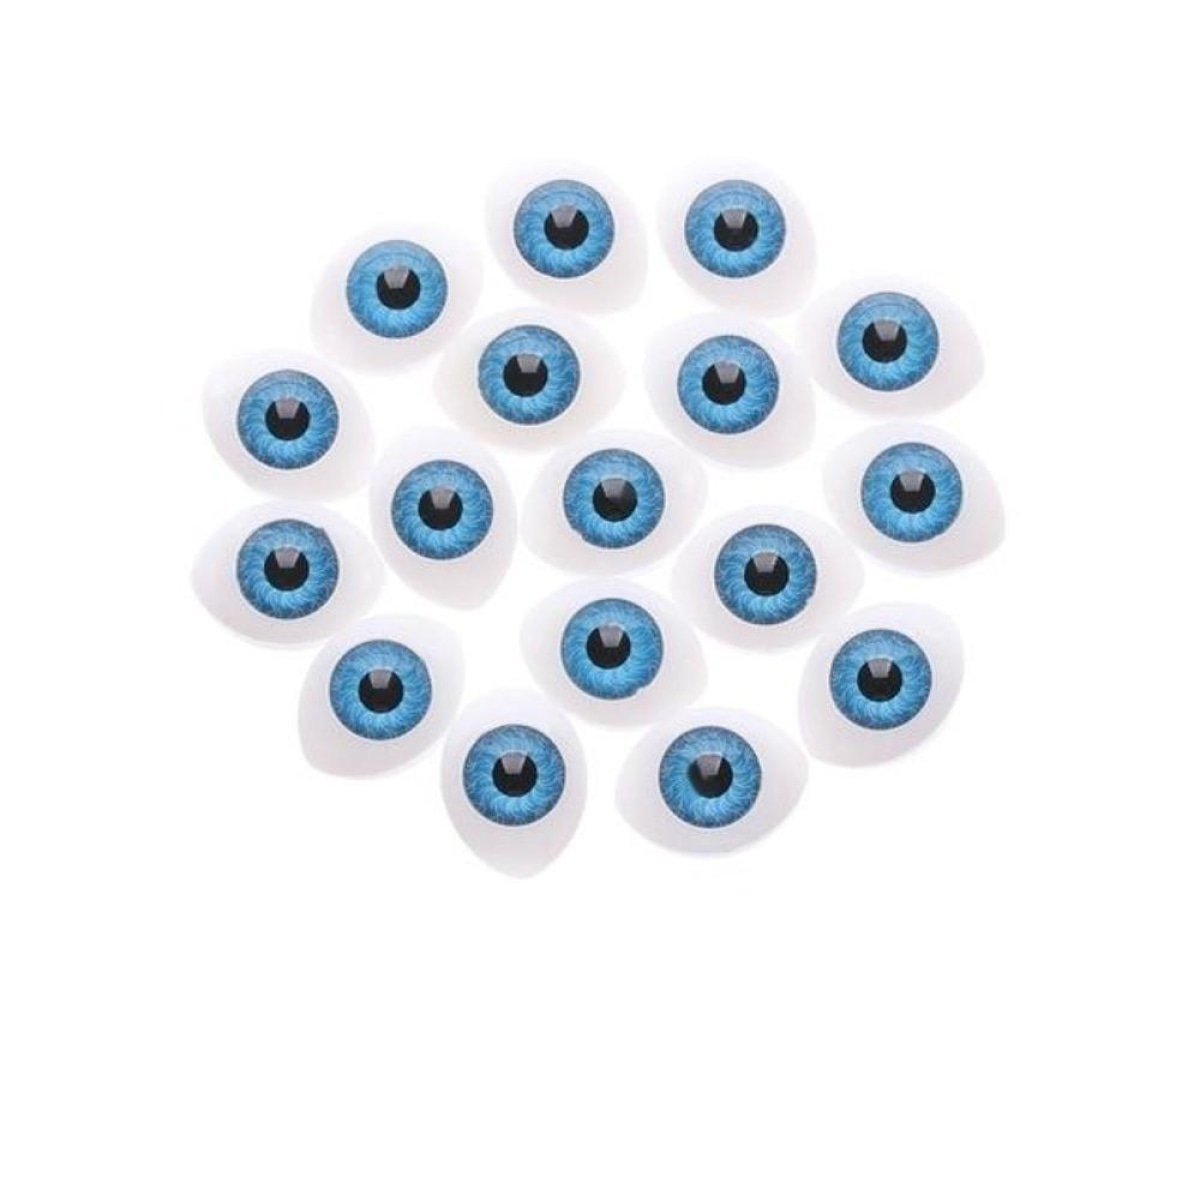 16/20pcs Oval Shaped Doll Eyes Plastic for DIY Toy Doll Animal Puppet Dinosaur Half Round - Blue - 10x13mm - Asia Sell